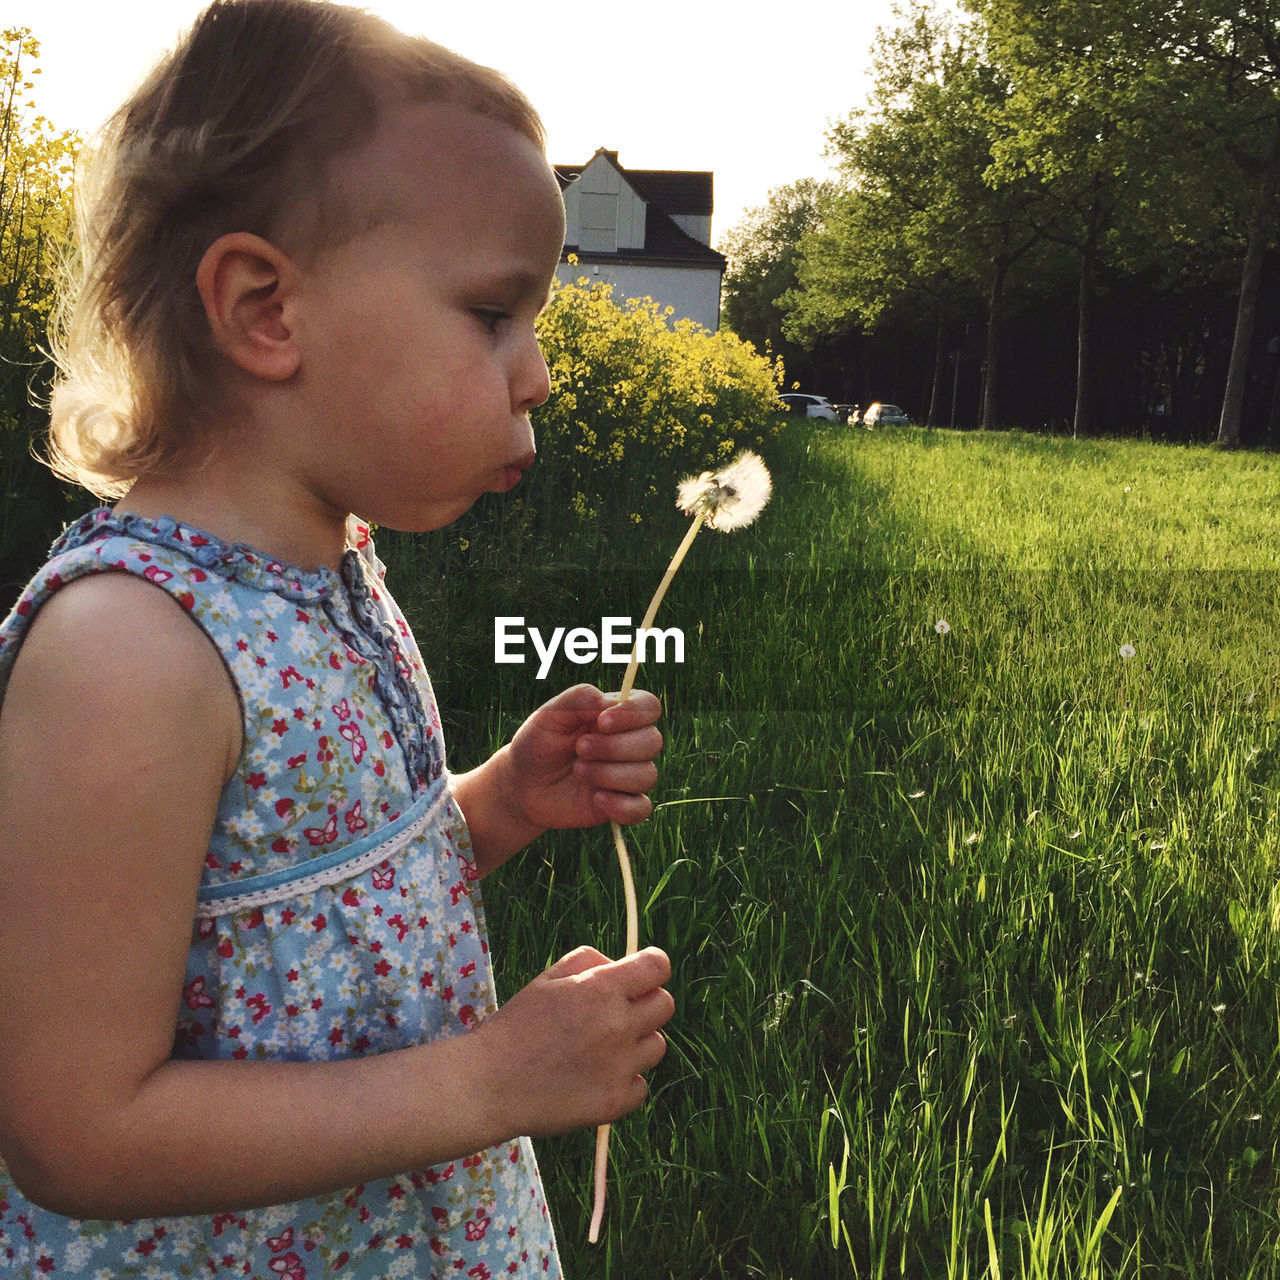 Cute girl blowing dandelion while standing outdoors